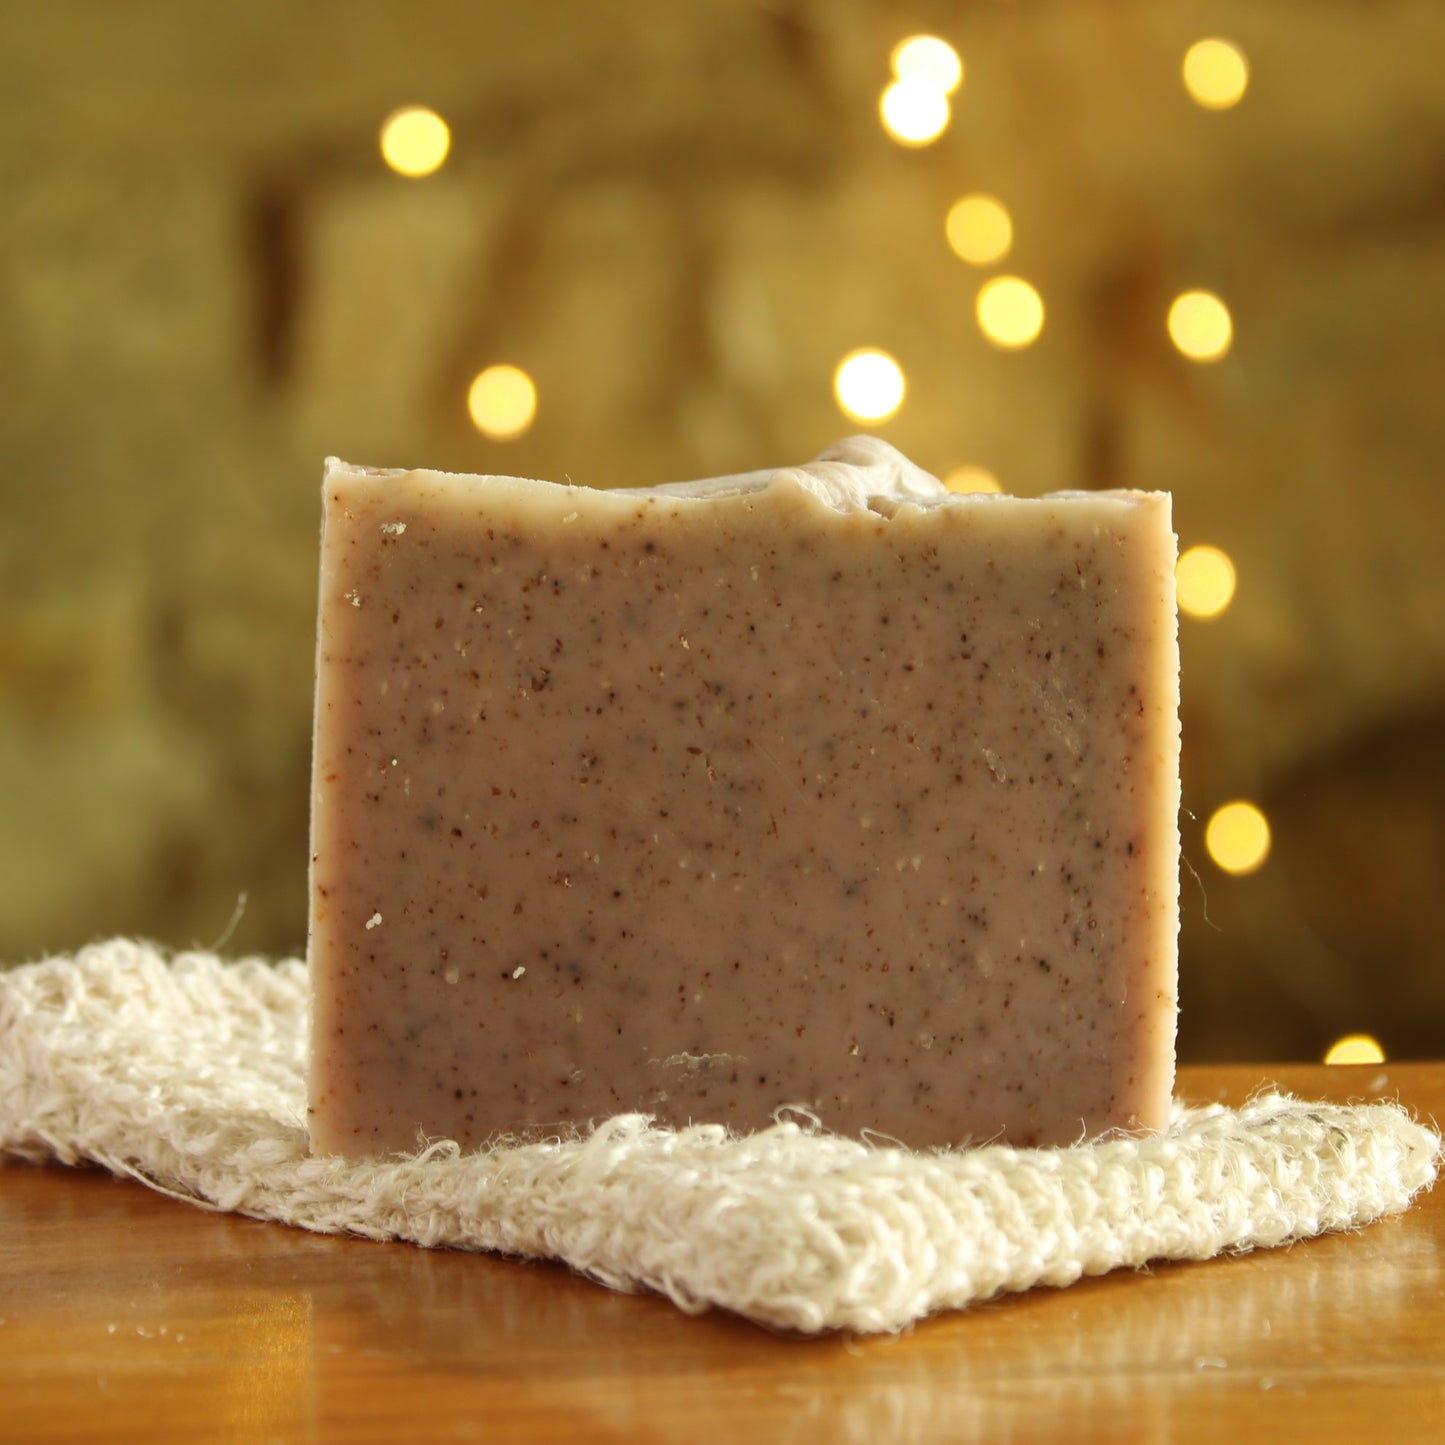 Oat + Lavender Cold Process Soap | Gentle, Soothing, Facial Soap | 310 Soap + Skin - 310skin